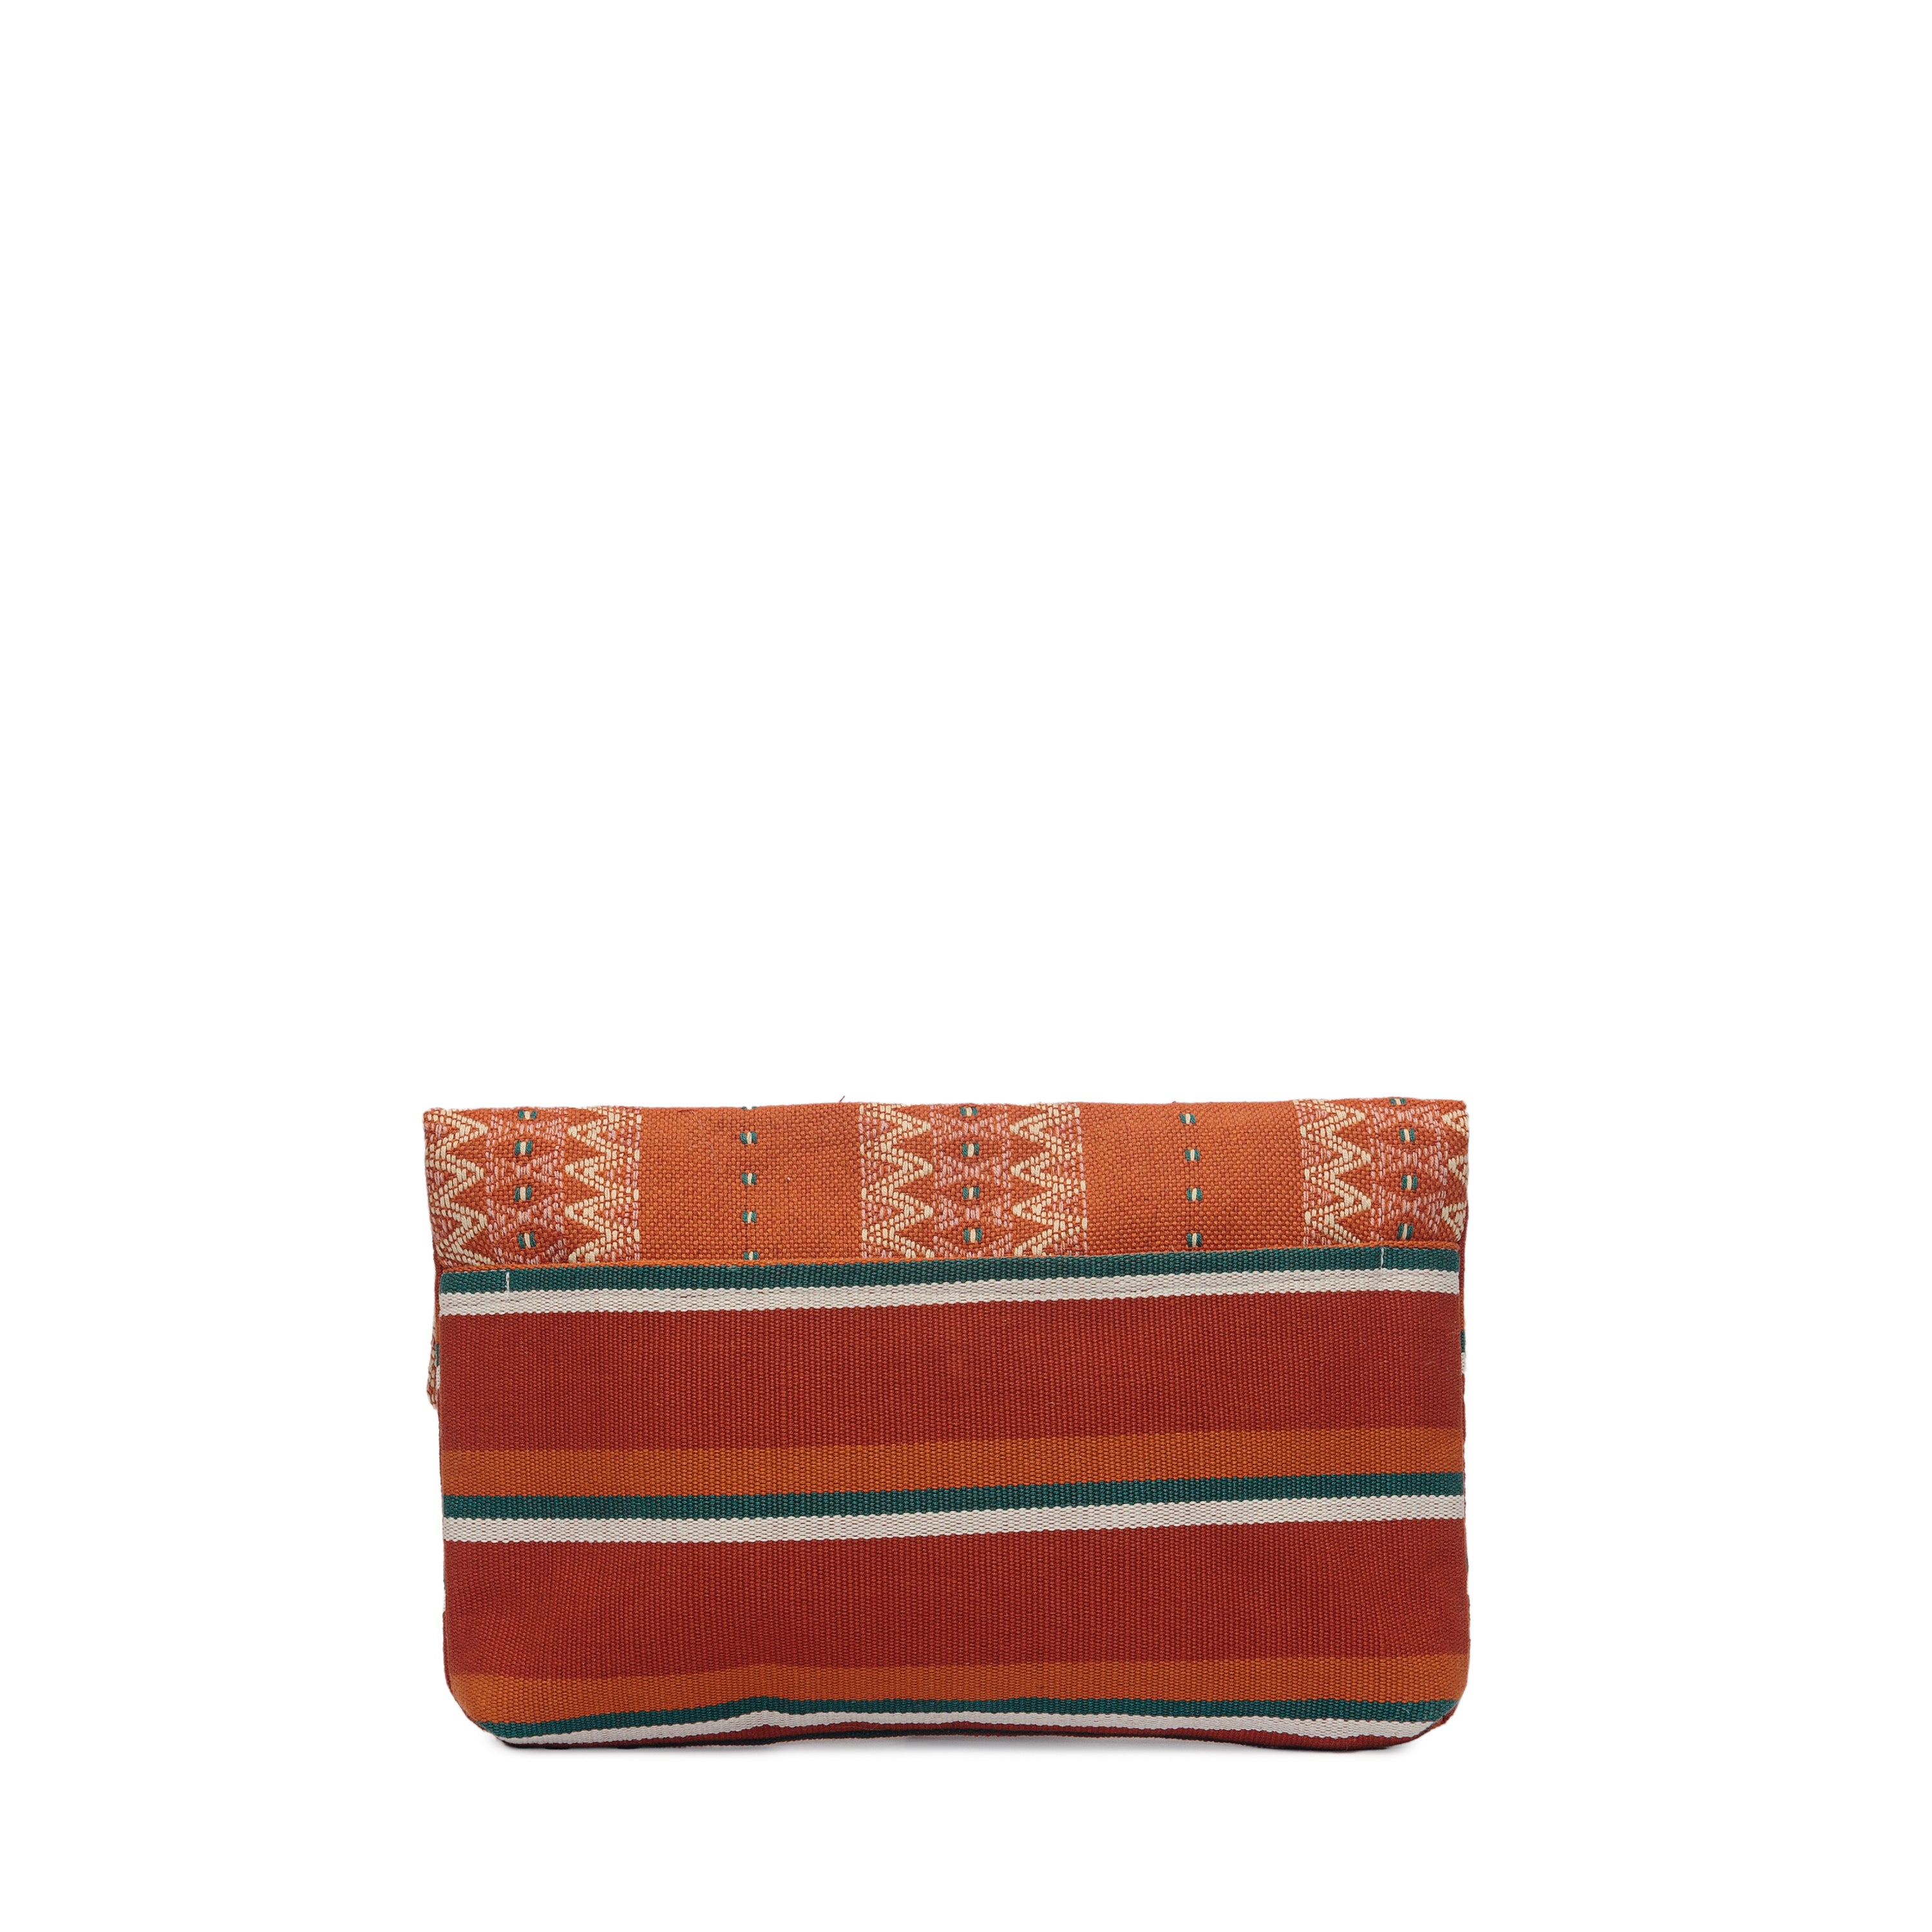 The back view of the hand woven artisan Celia Clutch in Ginger color. The back shows where the two fabrics meet, one with a red and green vertical striped fabric, and the other with a zigzag yellow and orange pattern. 